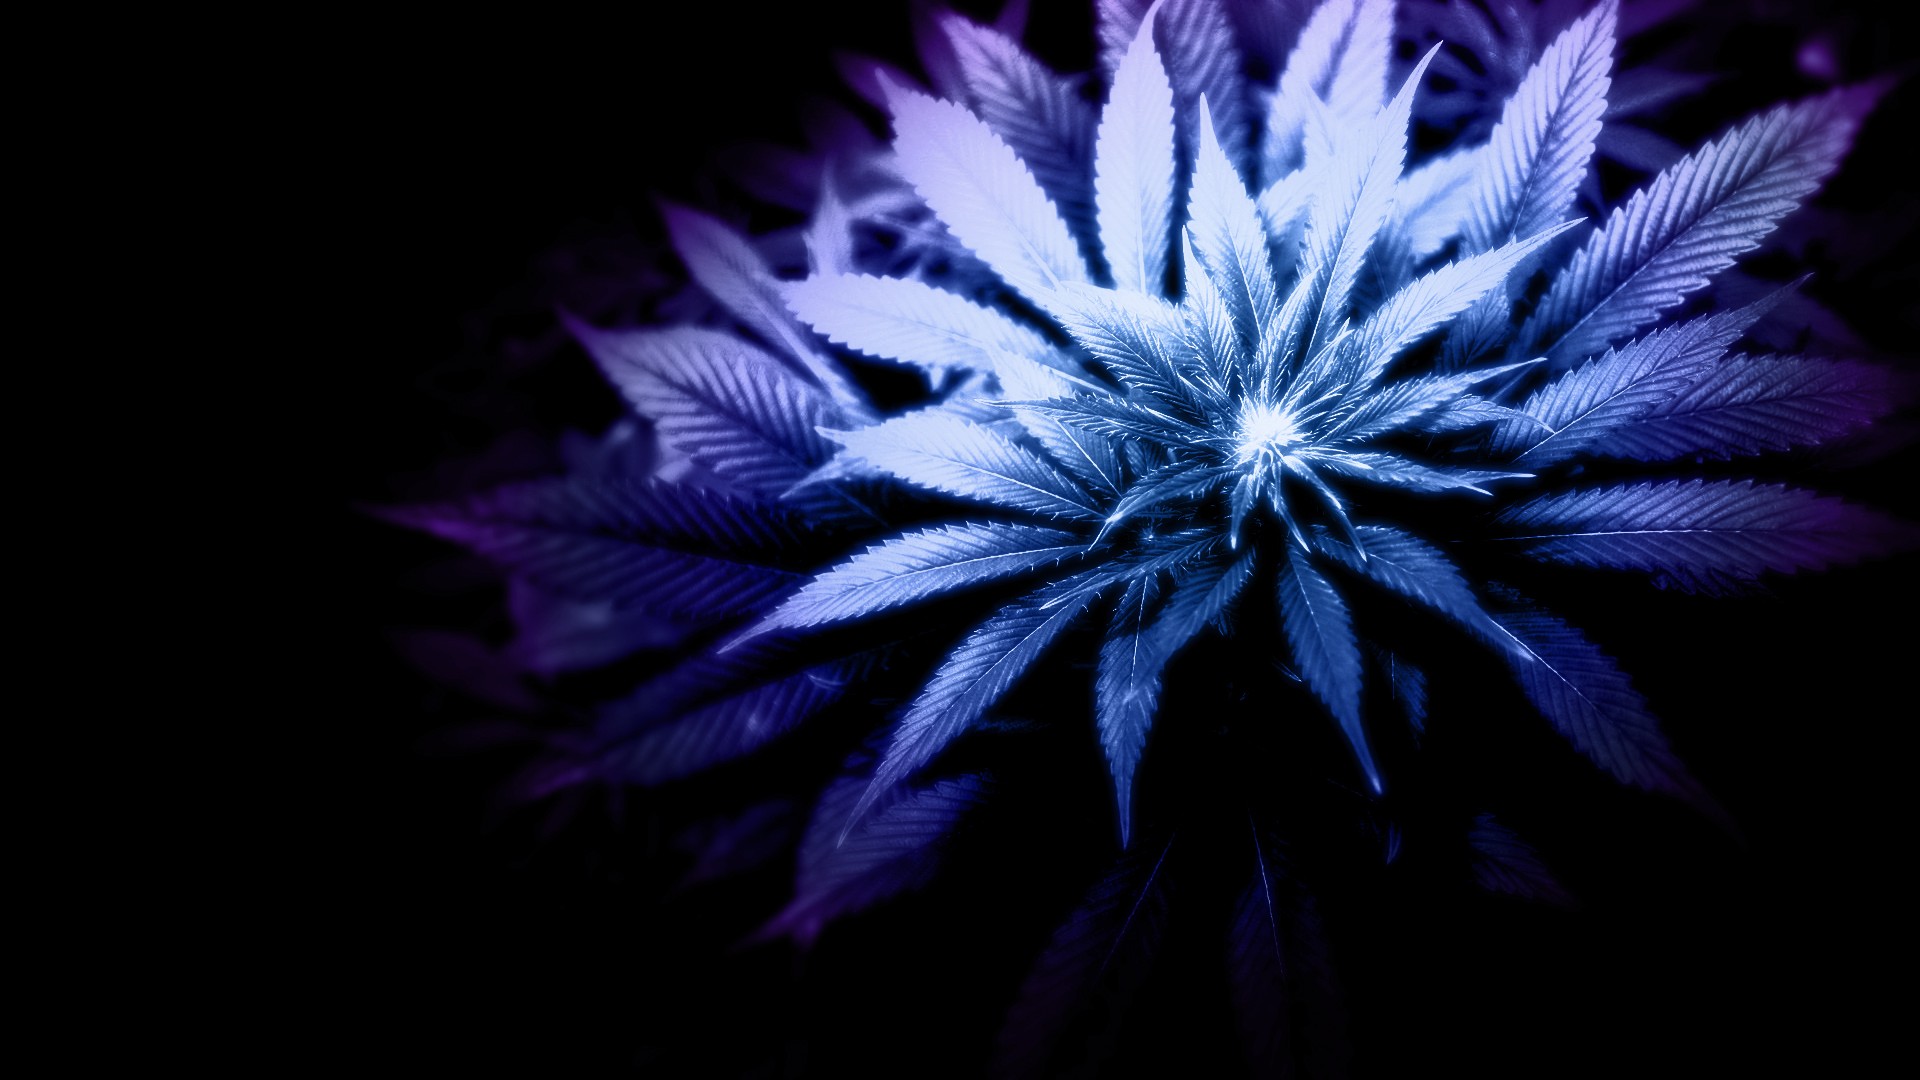 Weed Wallpaper Hd For Mobile Download